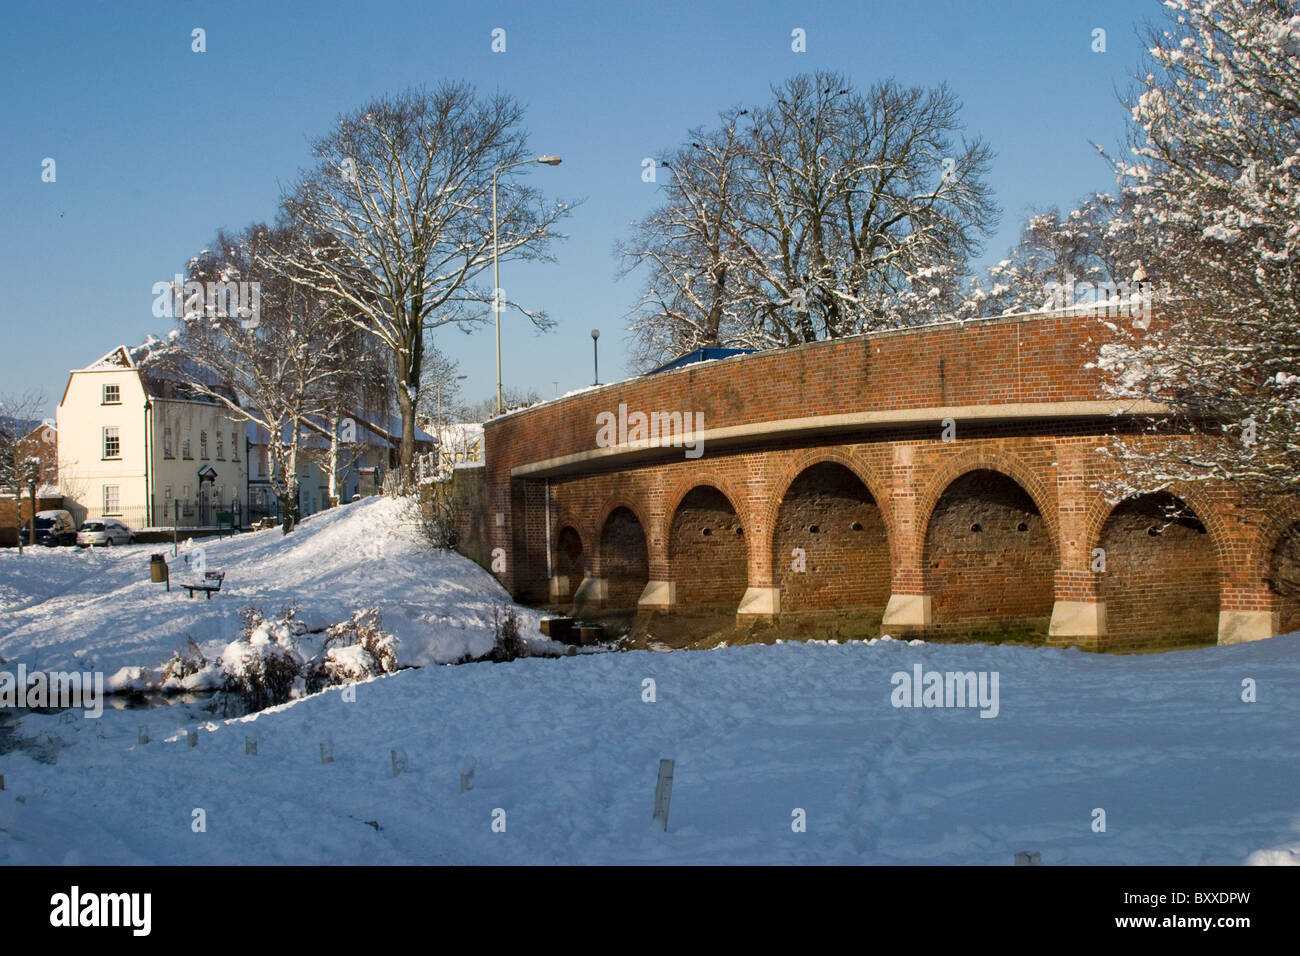 Multi arched brick built Telford Bridge (a listed building) London Colney Hertfordshire crosses River Colne Stock Photo